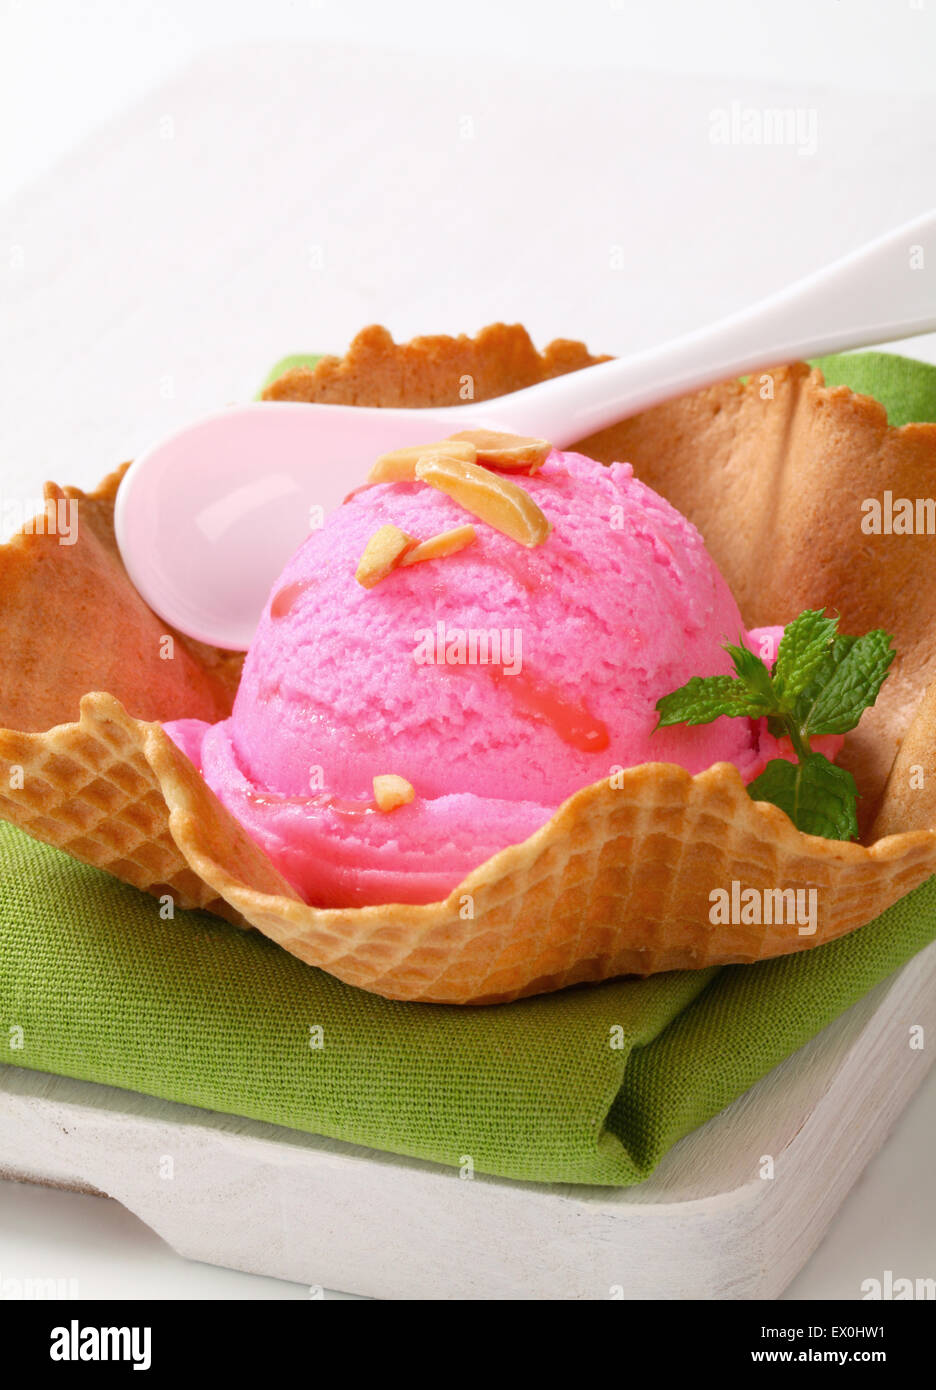 Pink fruit flavored ice cream in a waffle basket Stock Photo